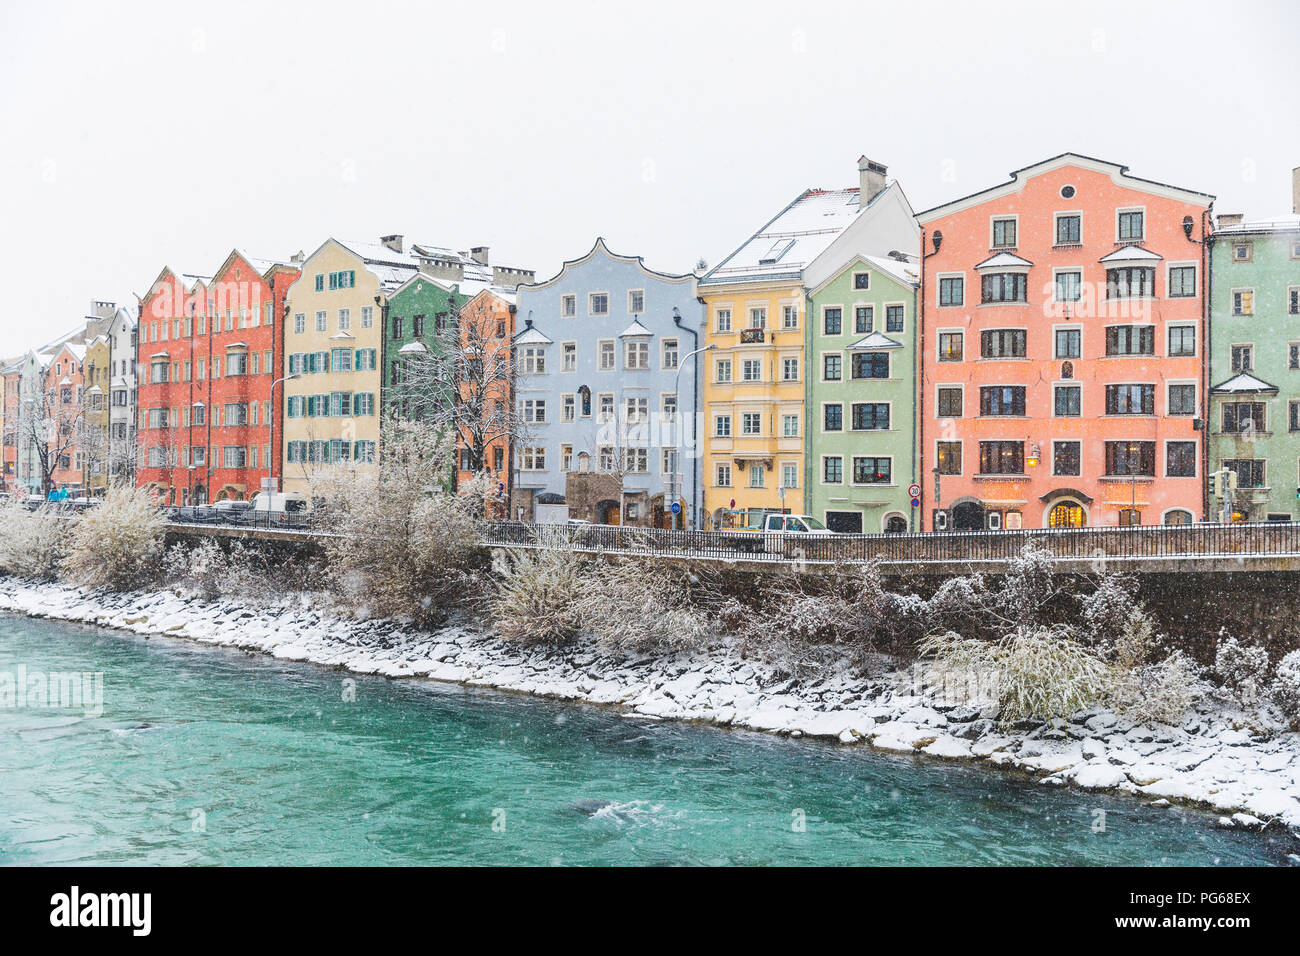 Austria, Innsbruck, row of colourful houses in winter with Inn River in the foreground Stock Photo